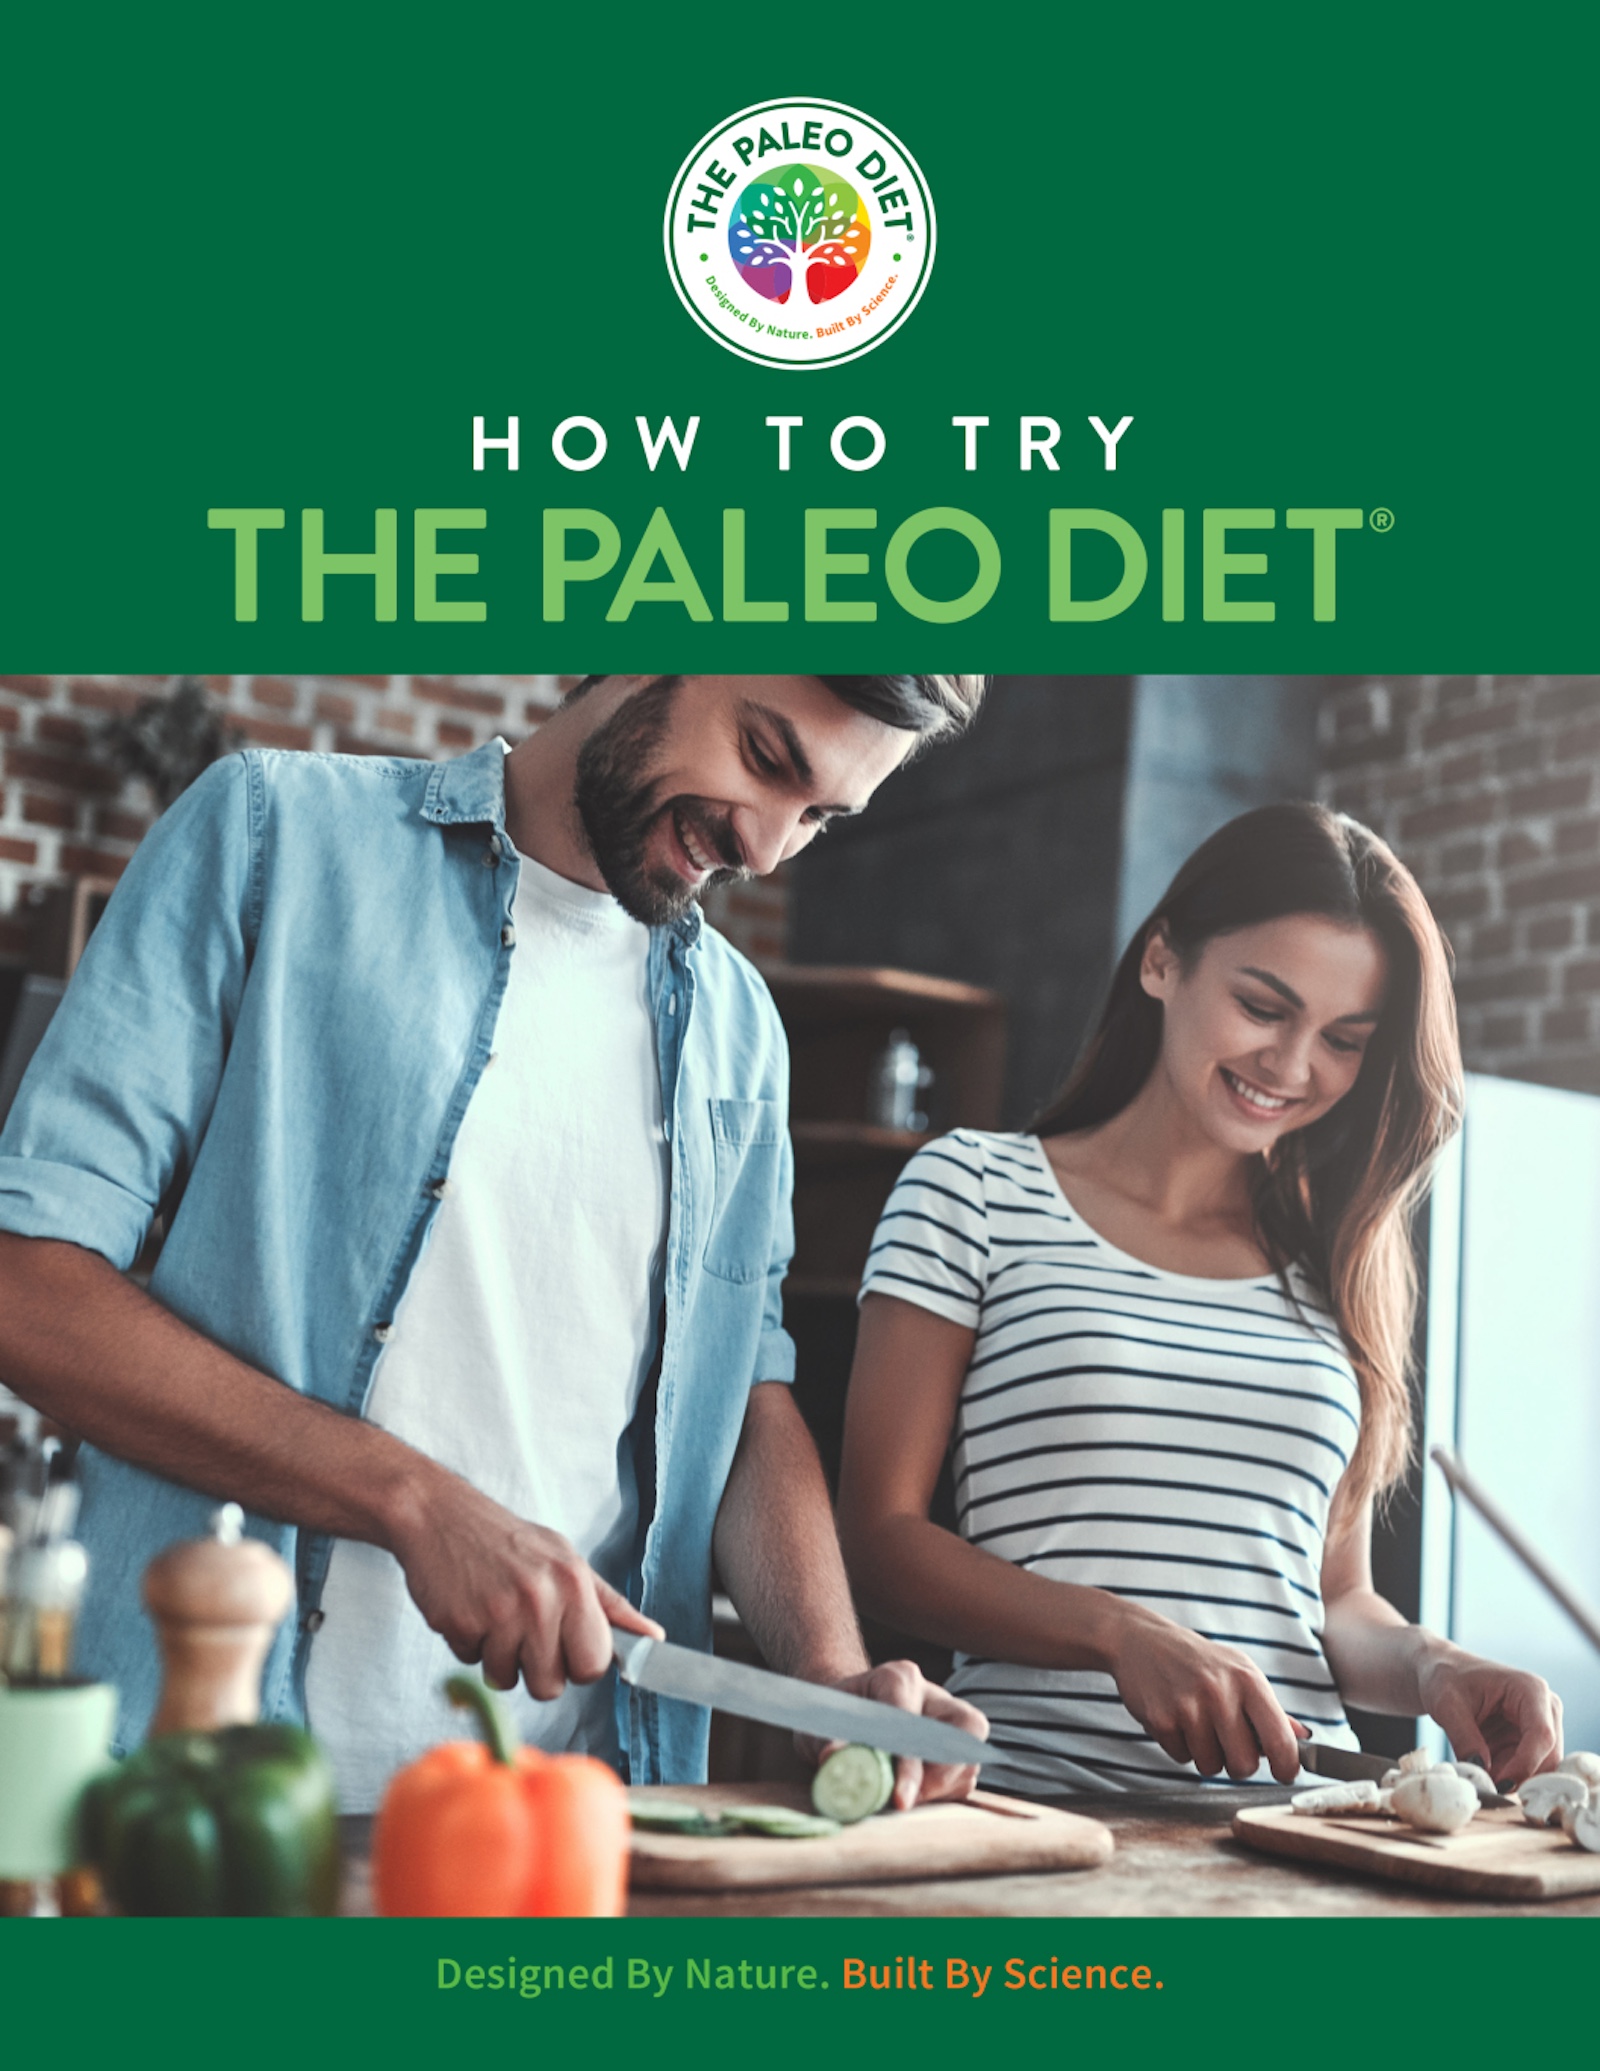 How to Try The Paleo Diet is a simple guide that makes it easy to get started on the strong and healthy, human-friendly diet.